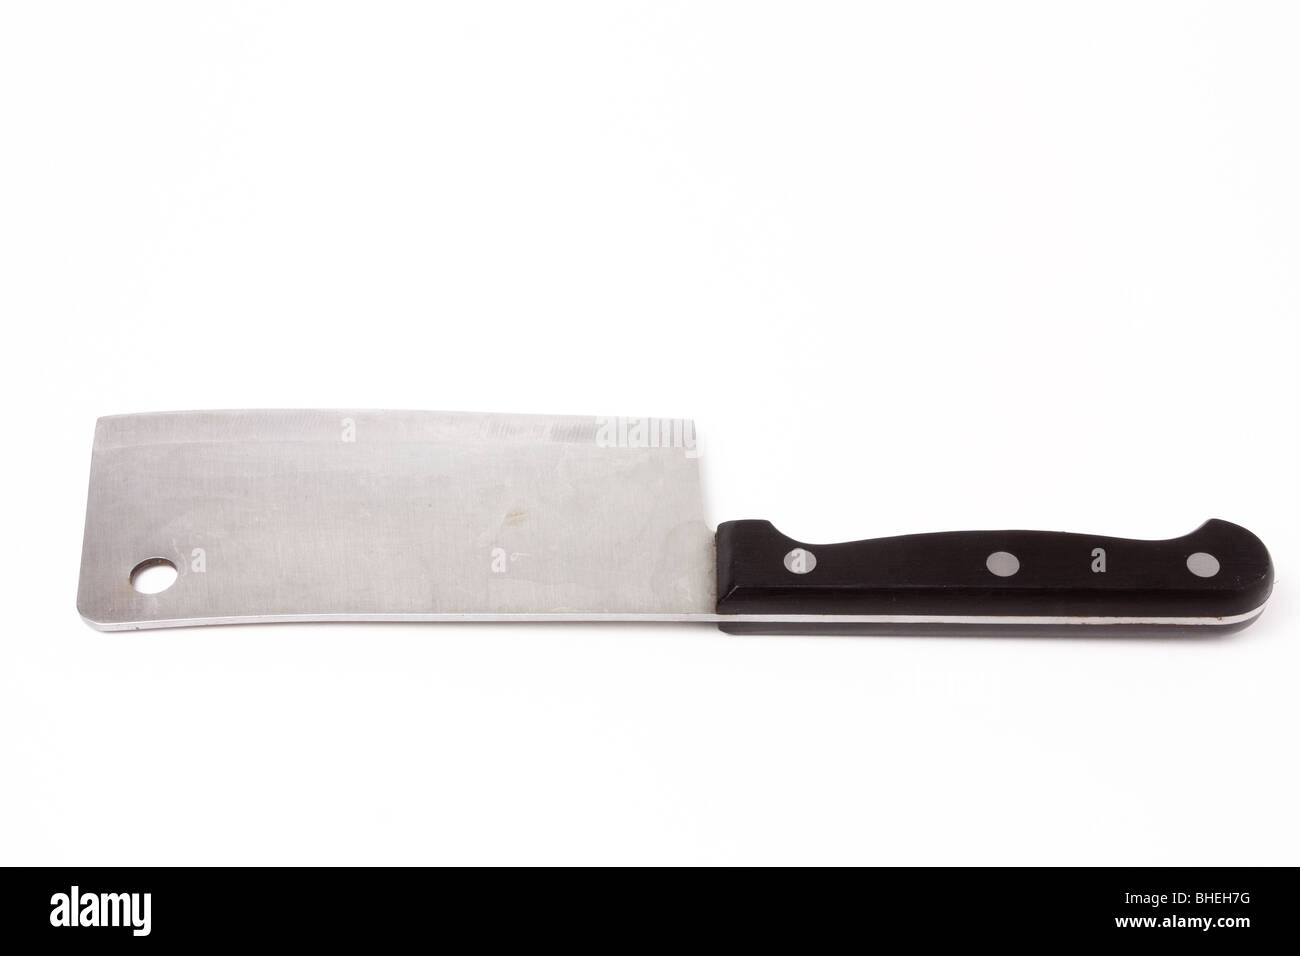 Steel meat cleaver Kitchen Utensil isolated against white background. Stock Photo